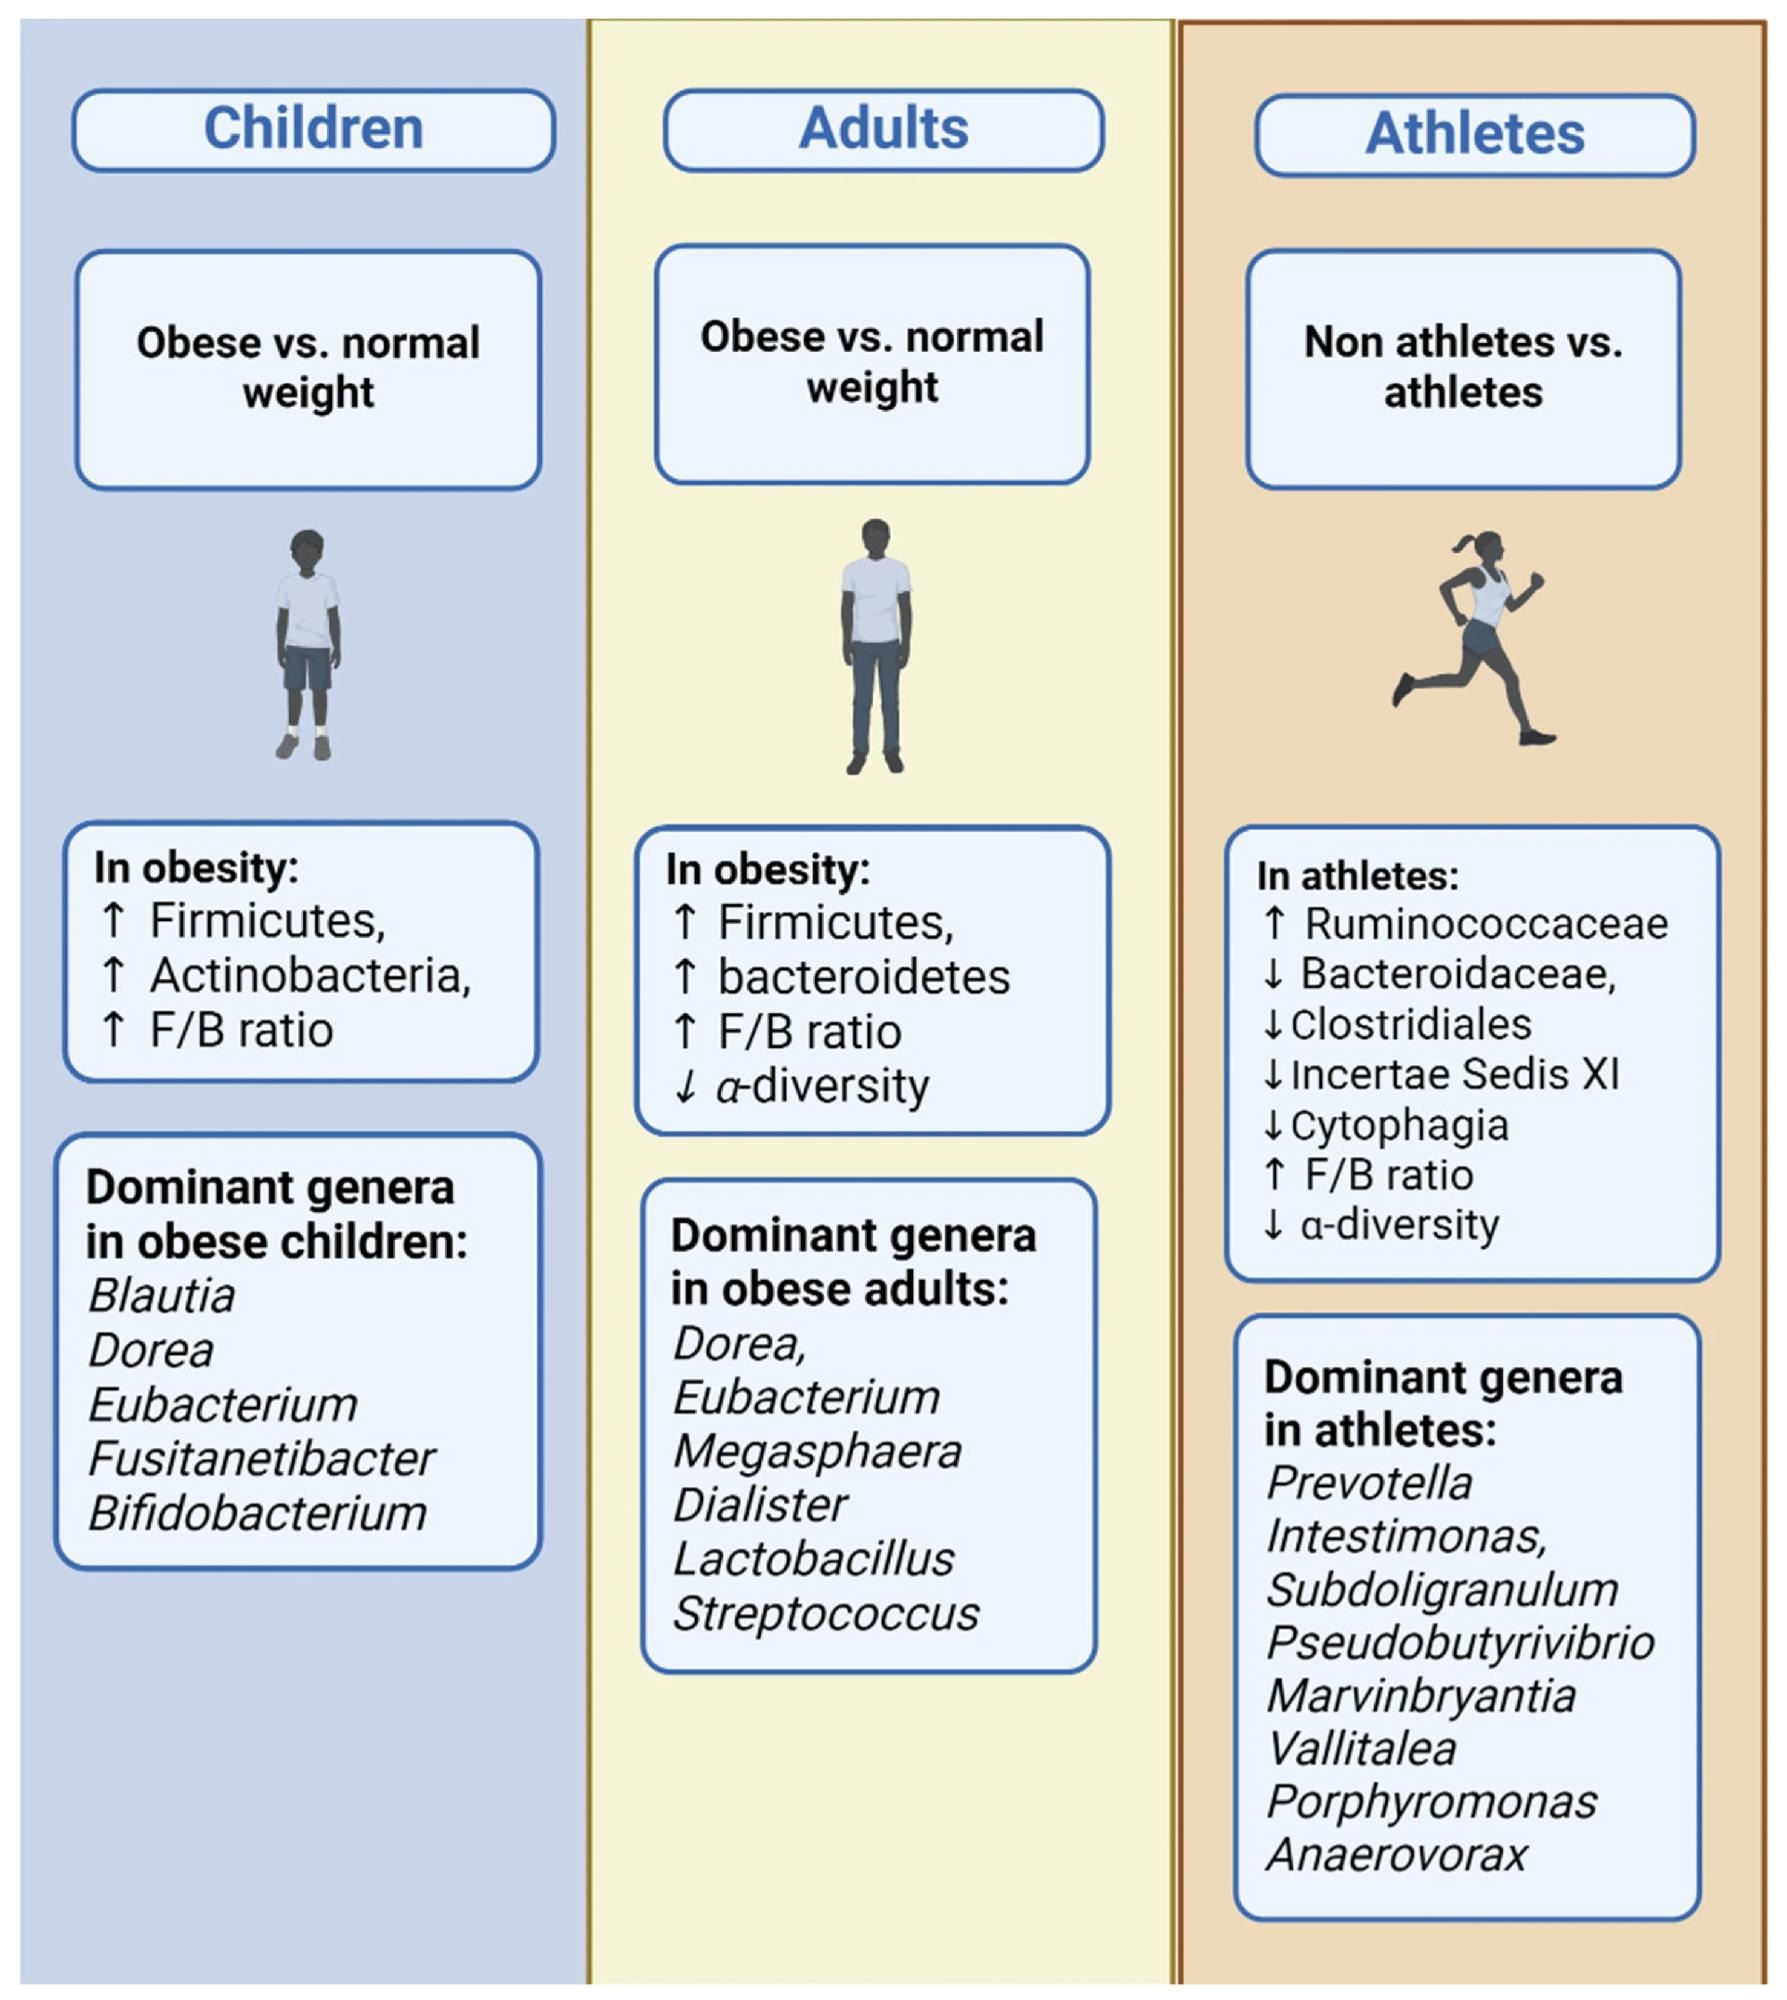 Bacterial phyla and general dynamics: contrasts between obesity and normal weight and across age groups including children, adults, and athletes.